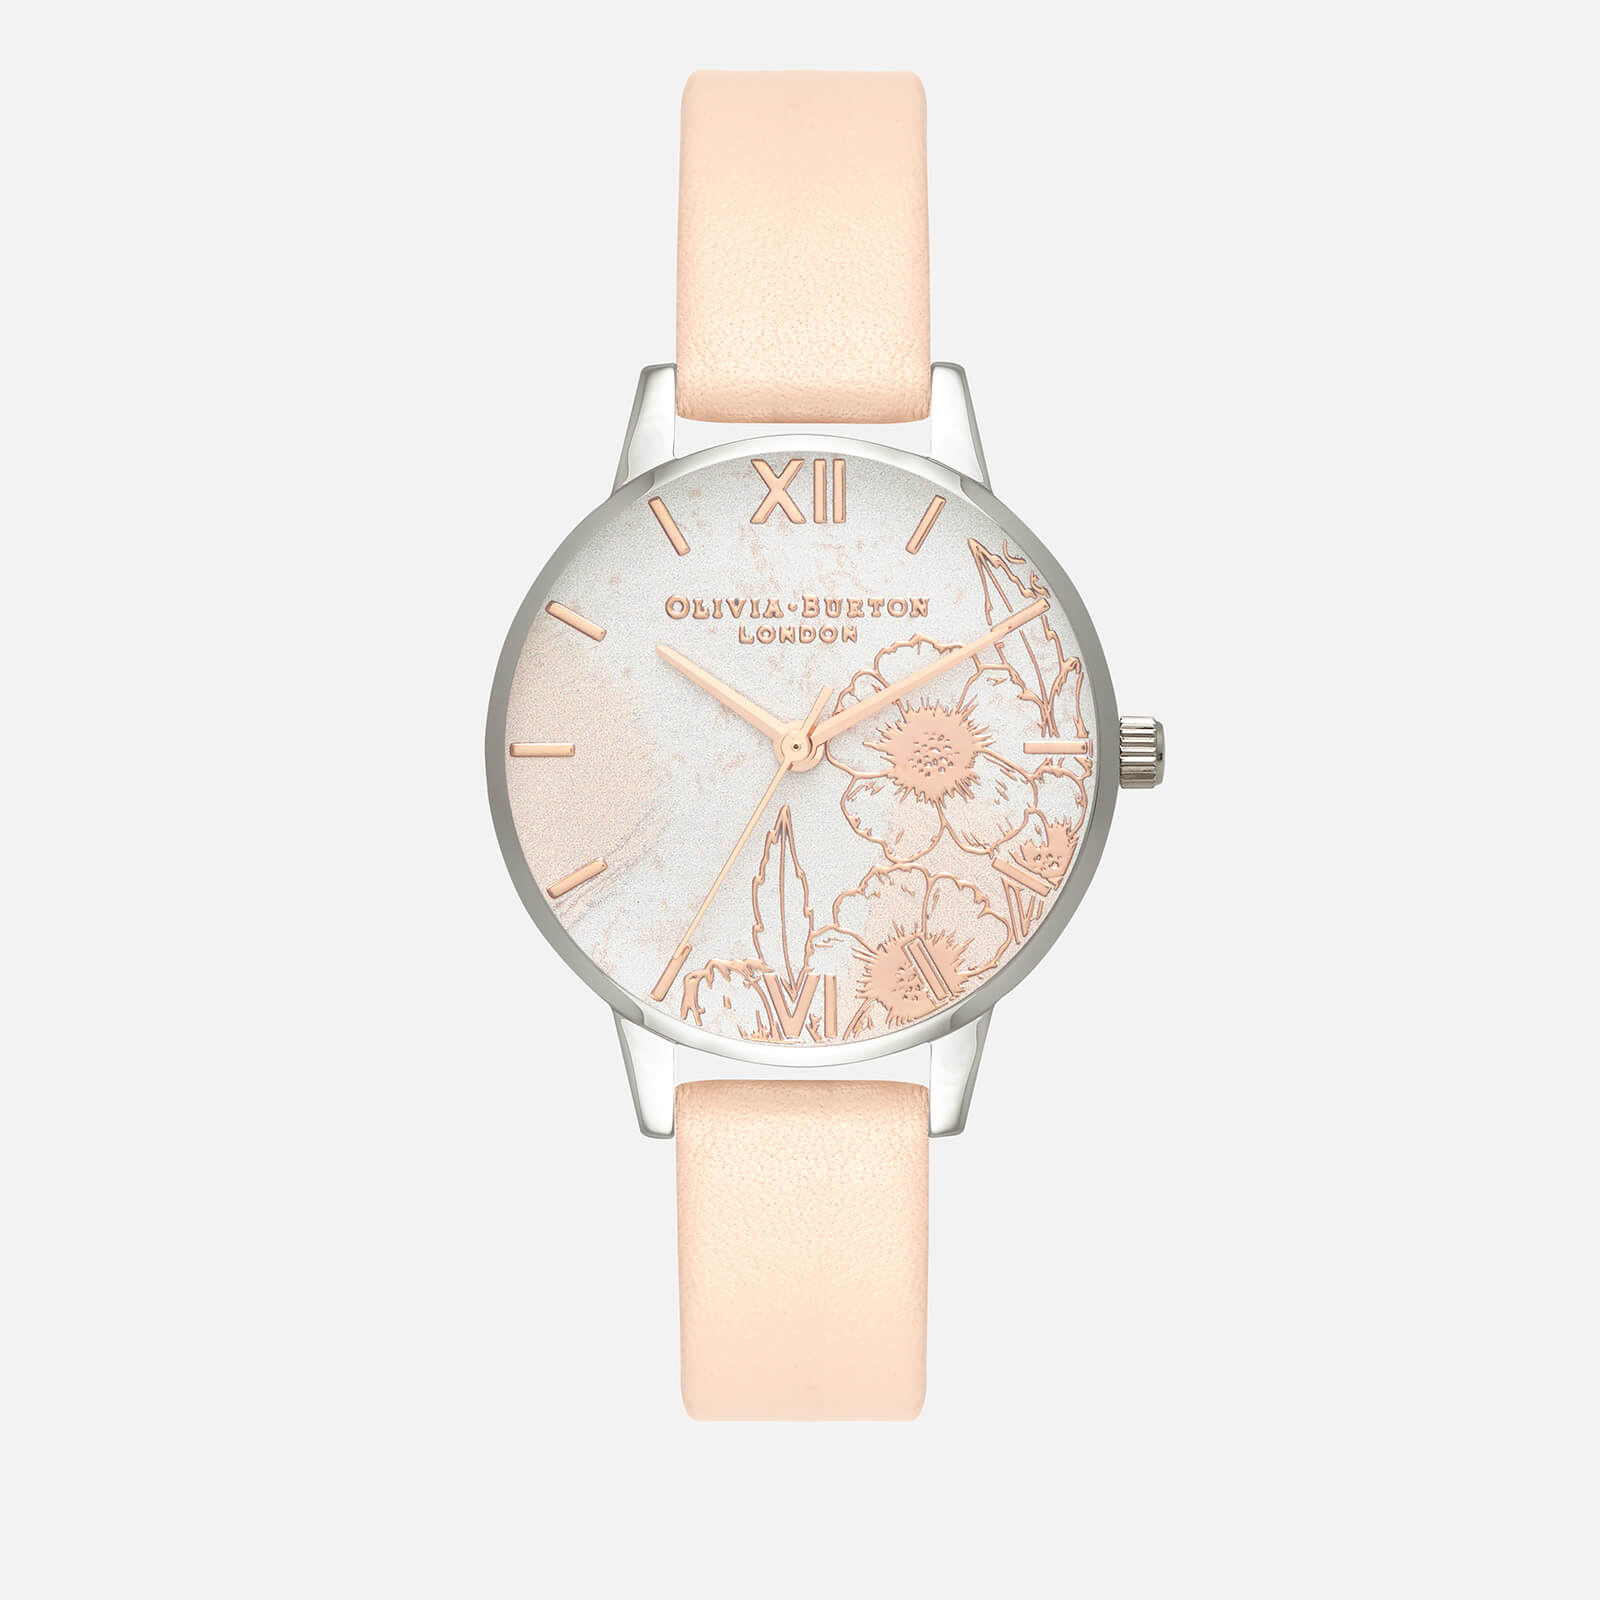 Olivia Burton Women's Abstract Florals Watch - Nude Peach, Rose Gold and Silver